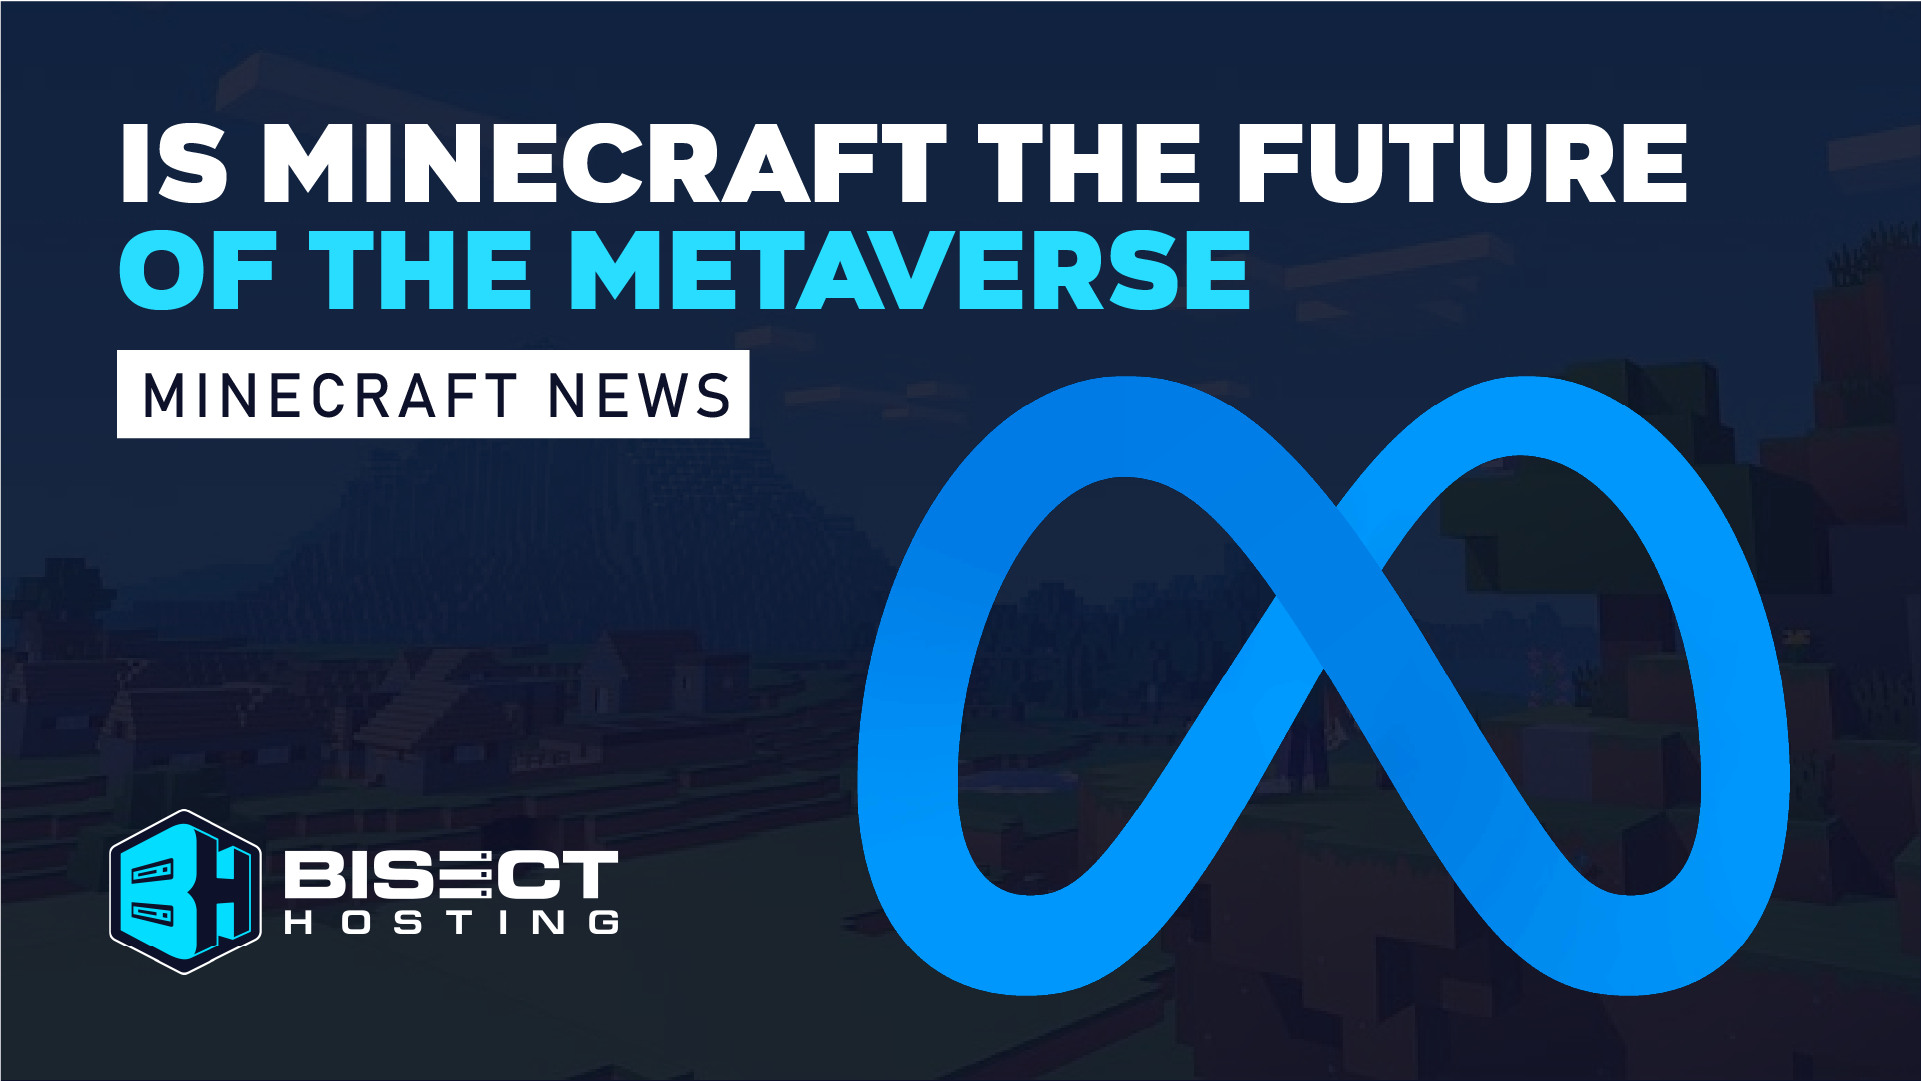 Is Minecraft the Future of Metaverse?